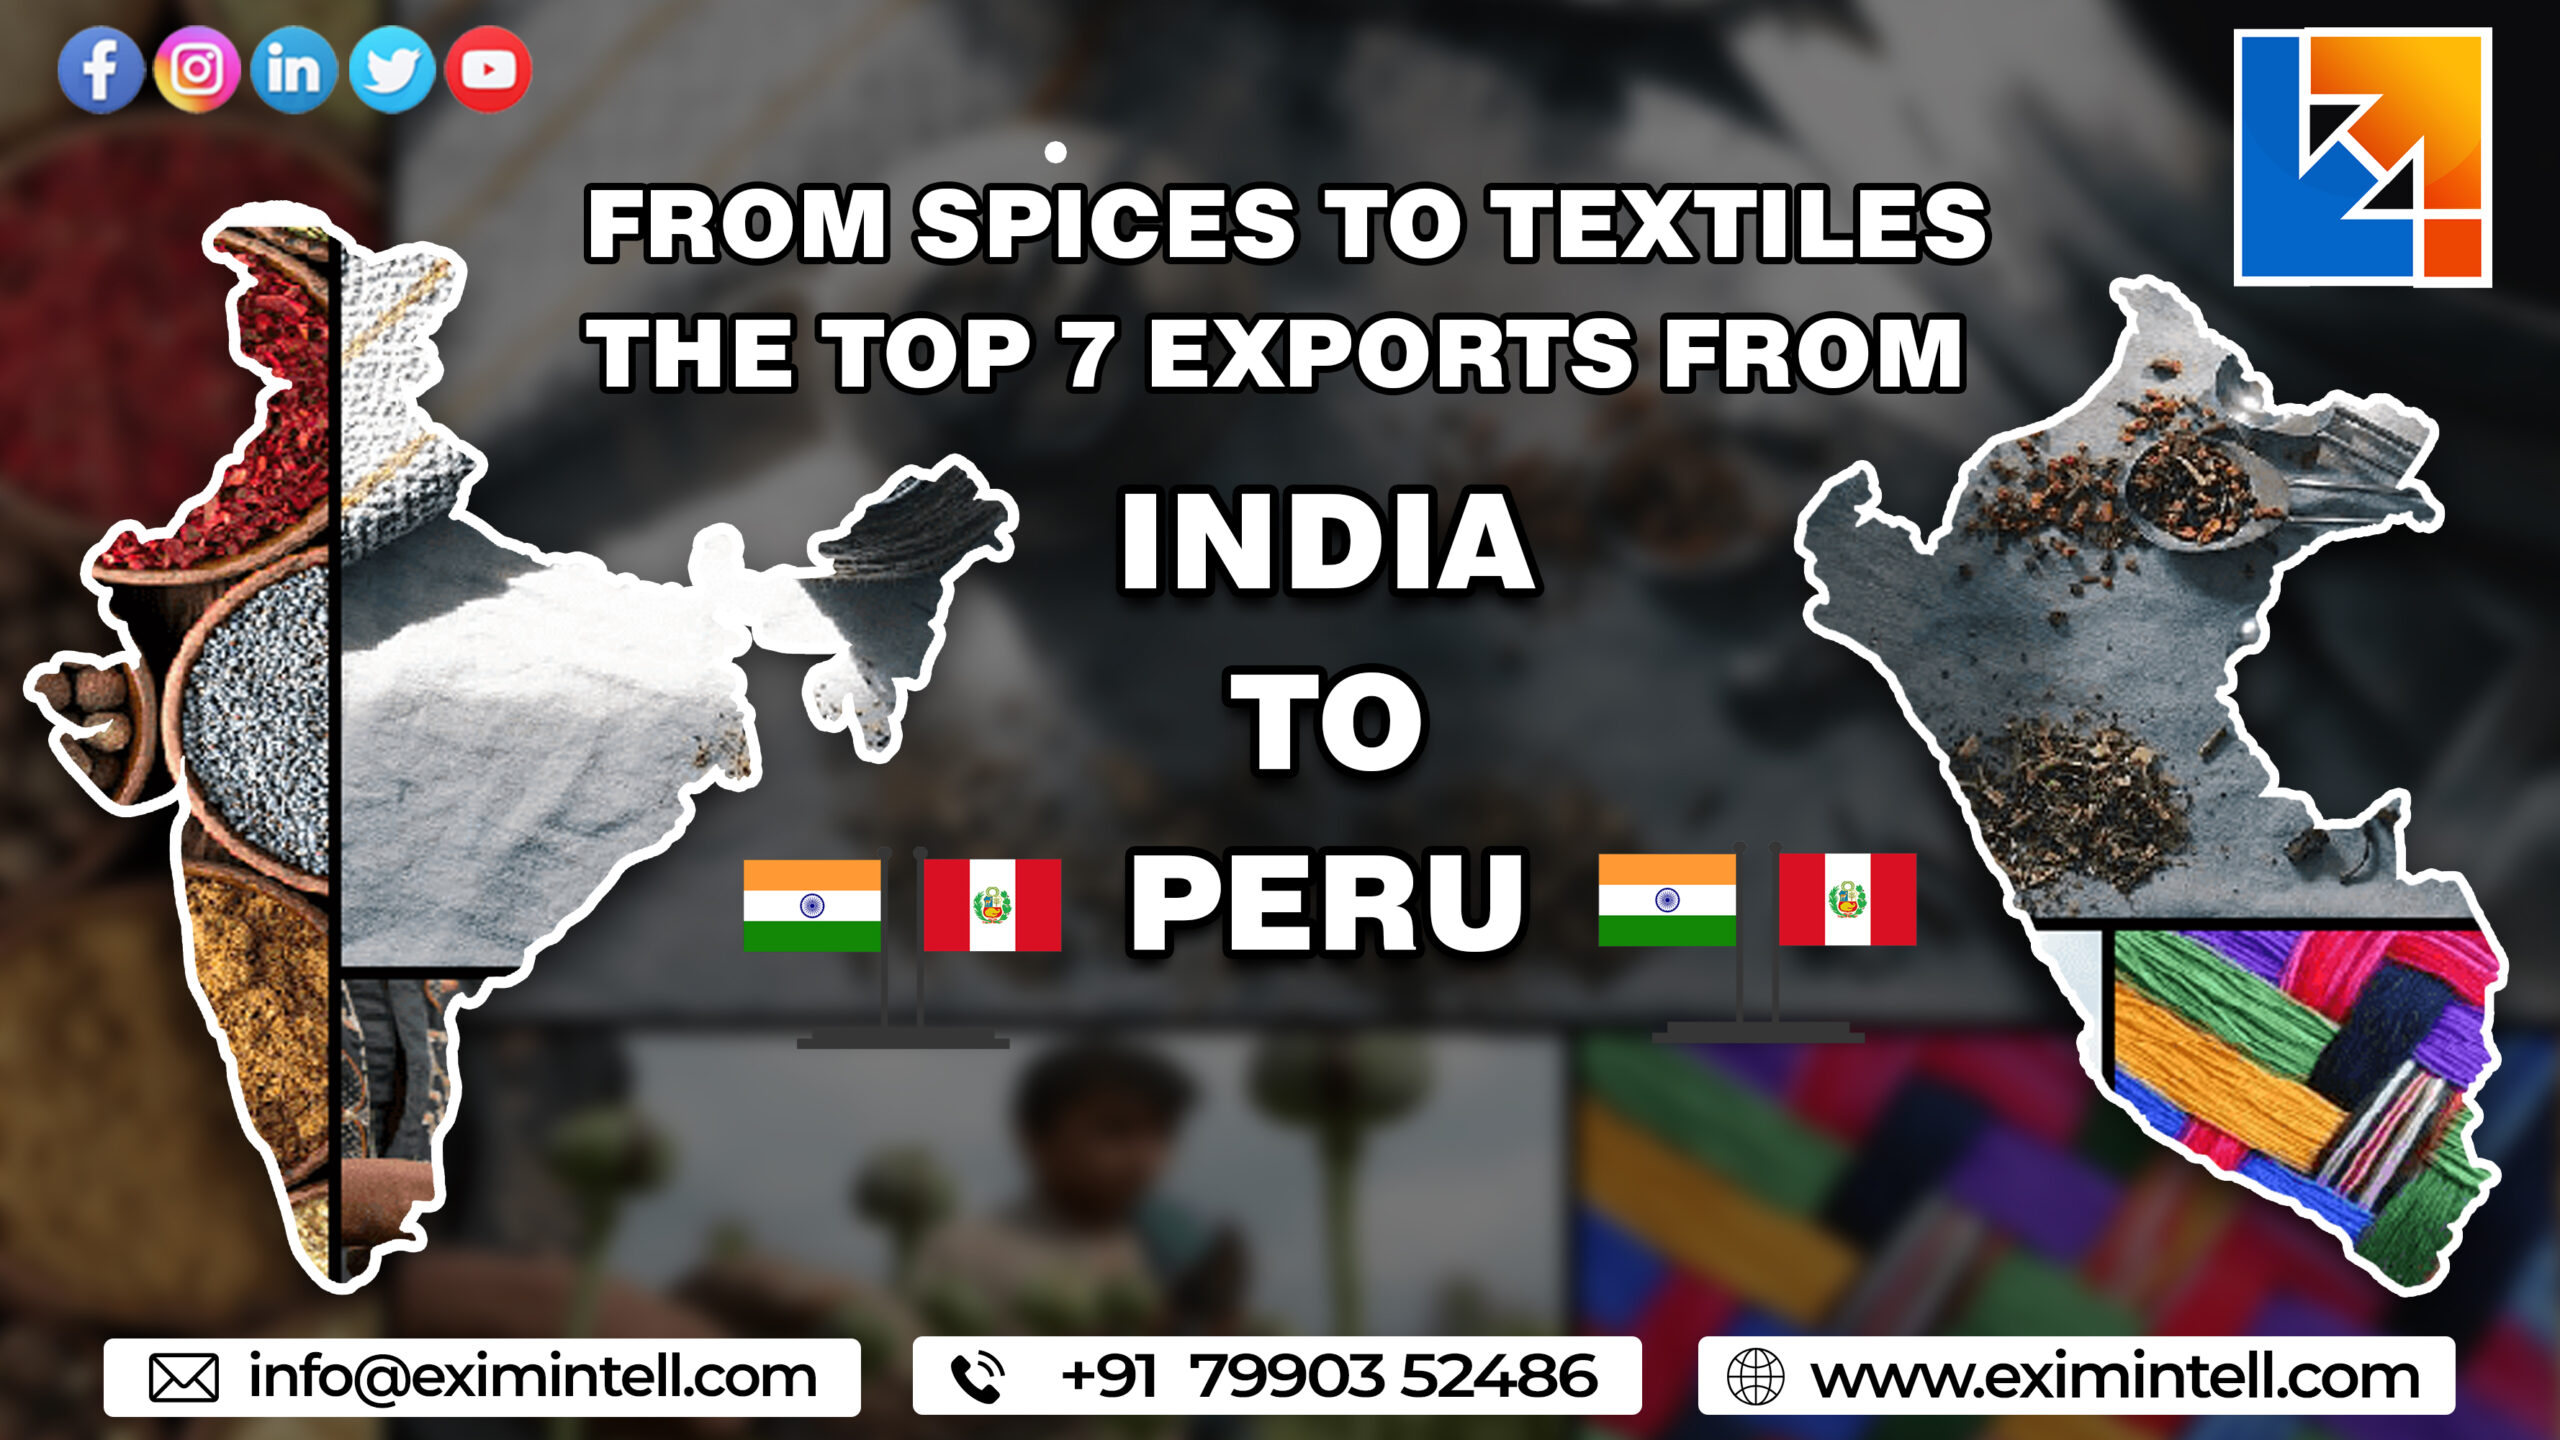 From spices to textiles: The top 7 exports from India to Peru